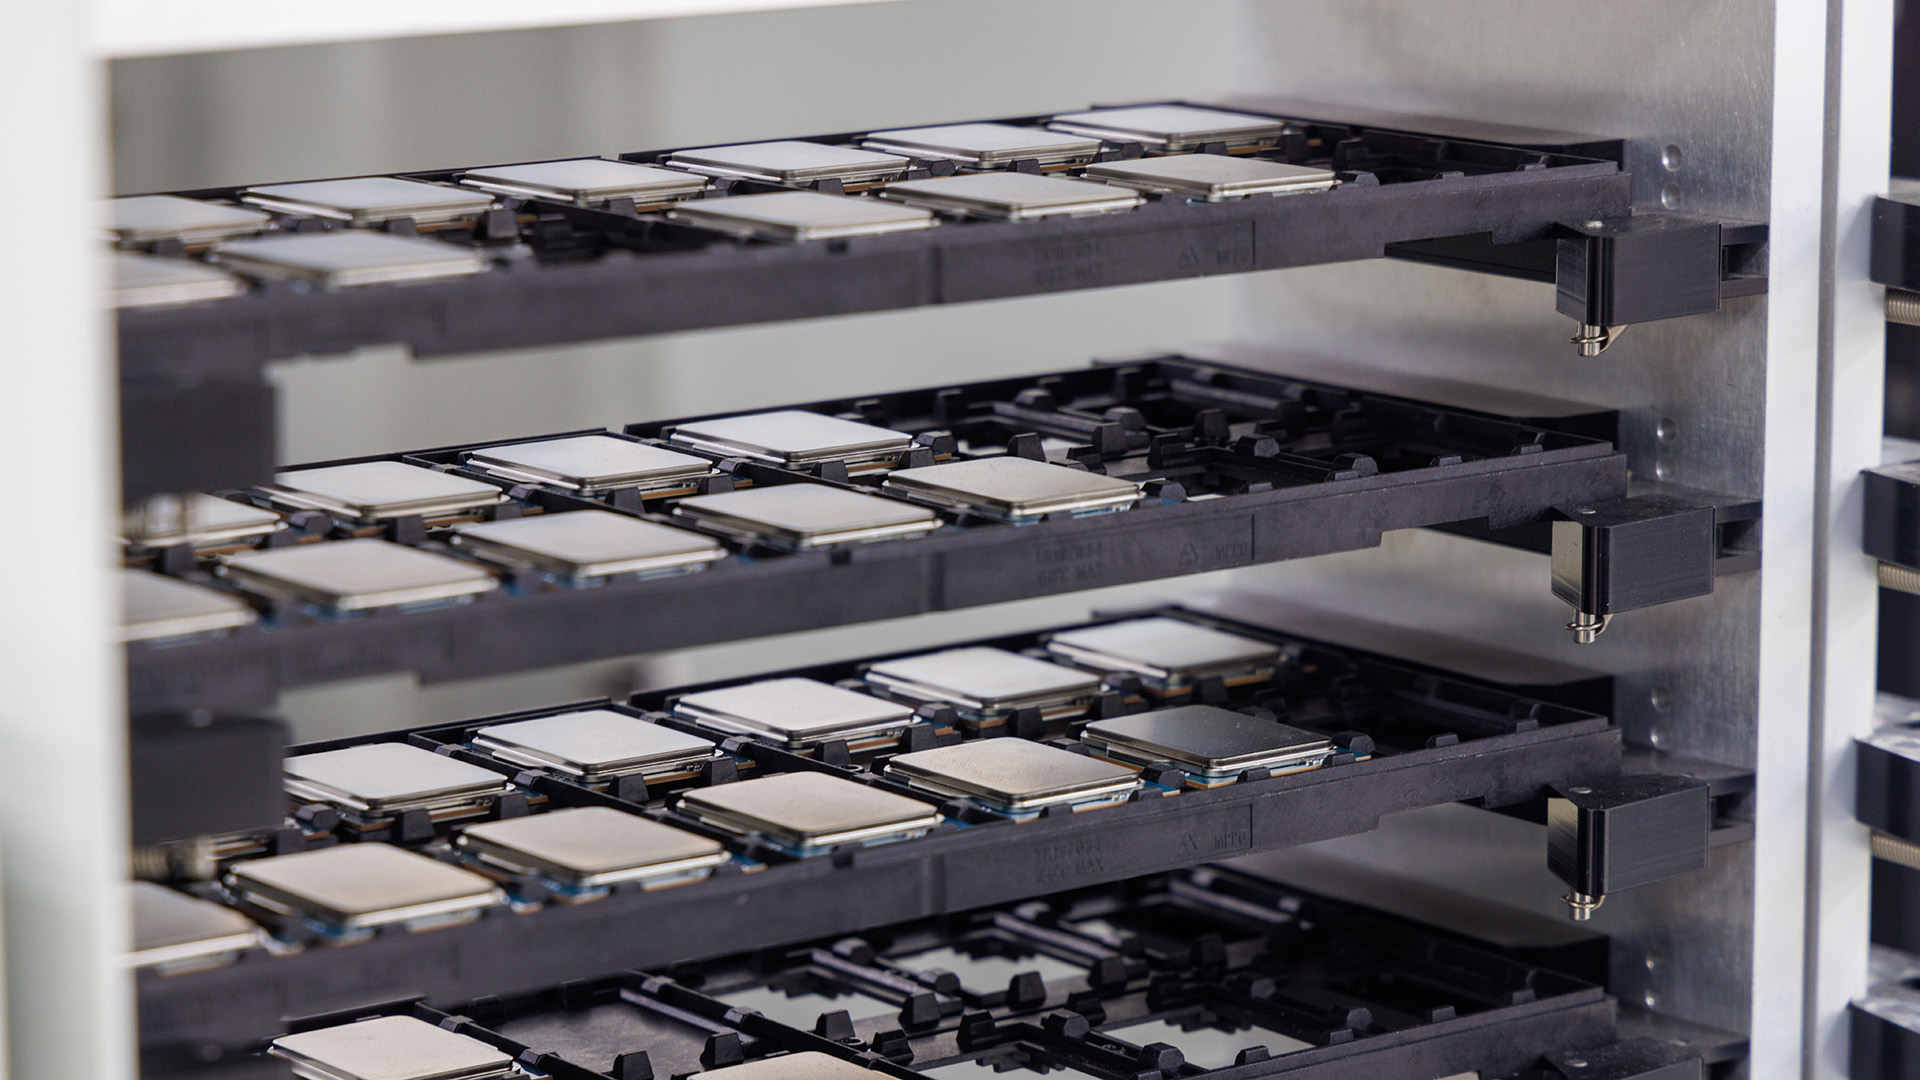 Trays of 12th or 13th Gen Intel processors waiting to be tested.